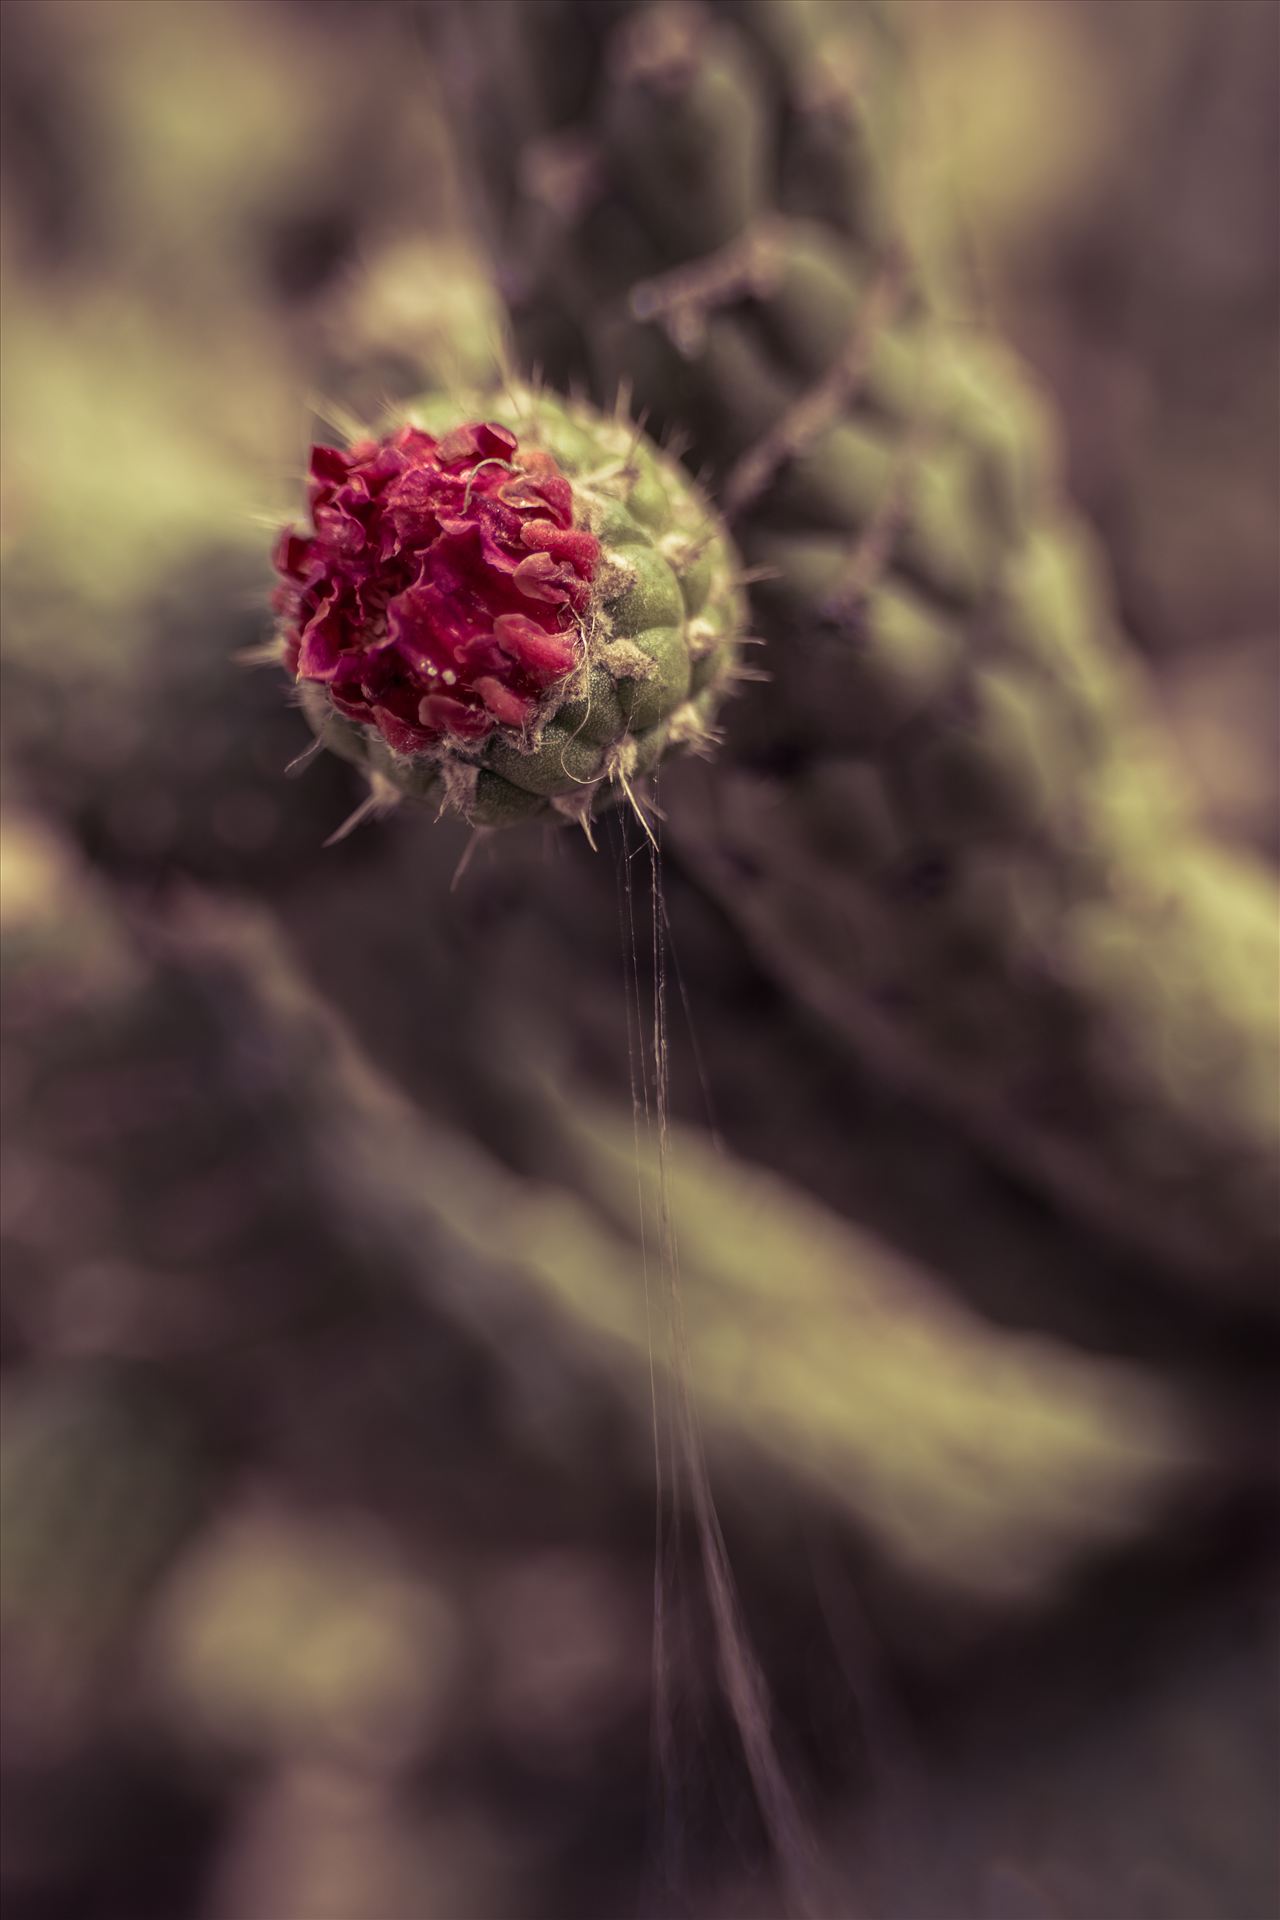 Cactus Flower.jpg Red bloom on cactus in the sun by Sarah Williams